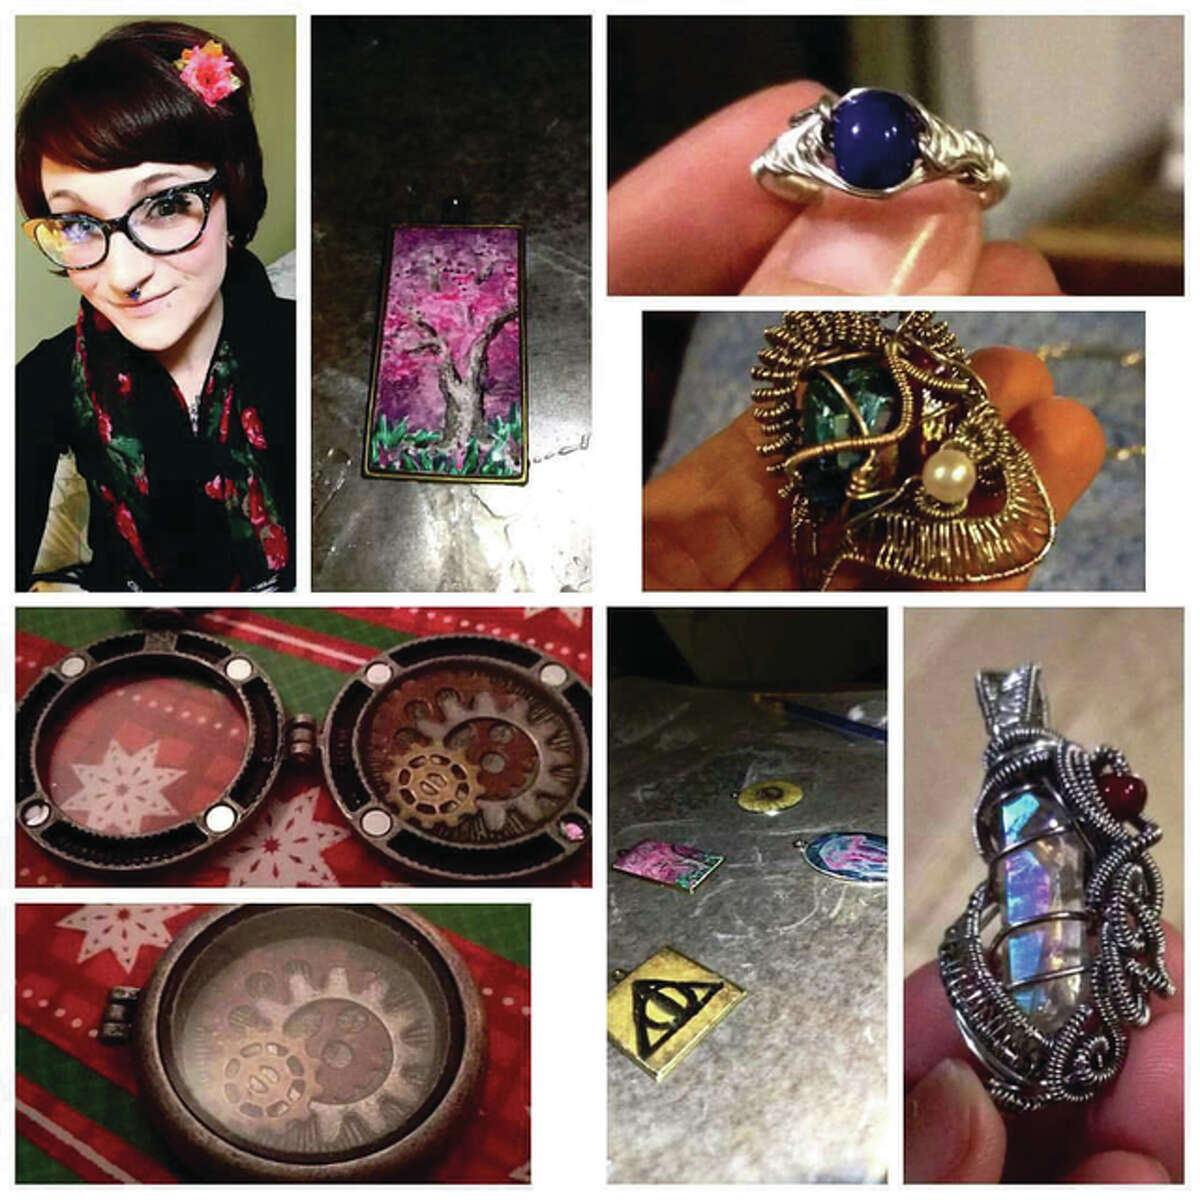 East Alton artist Ciera Strebler pictured in top left corner among images of some of her resin and wire-wrapped jewelry.